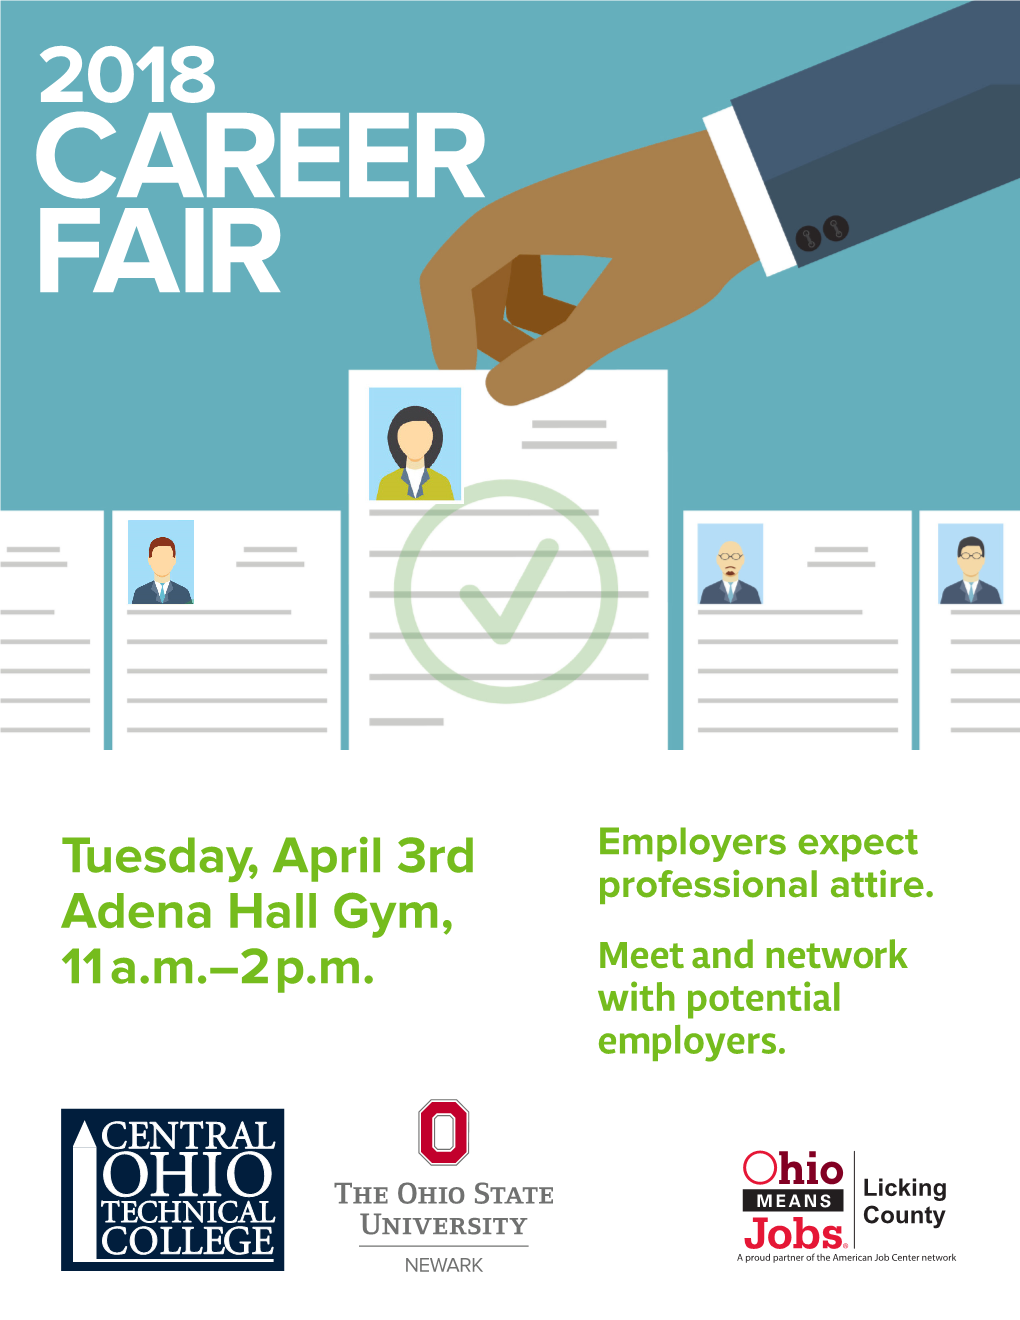 2P.M. Meet and Network with Potential Employers